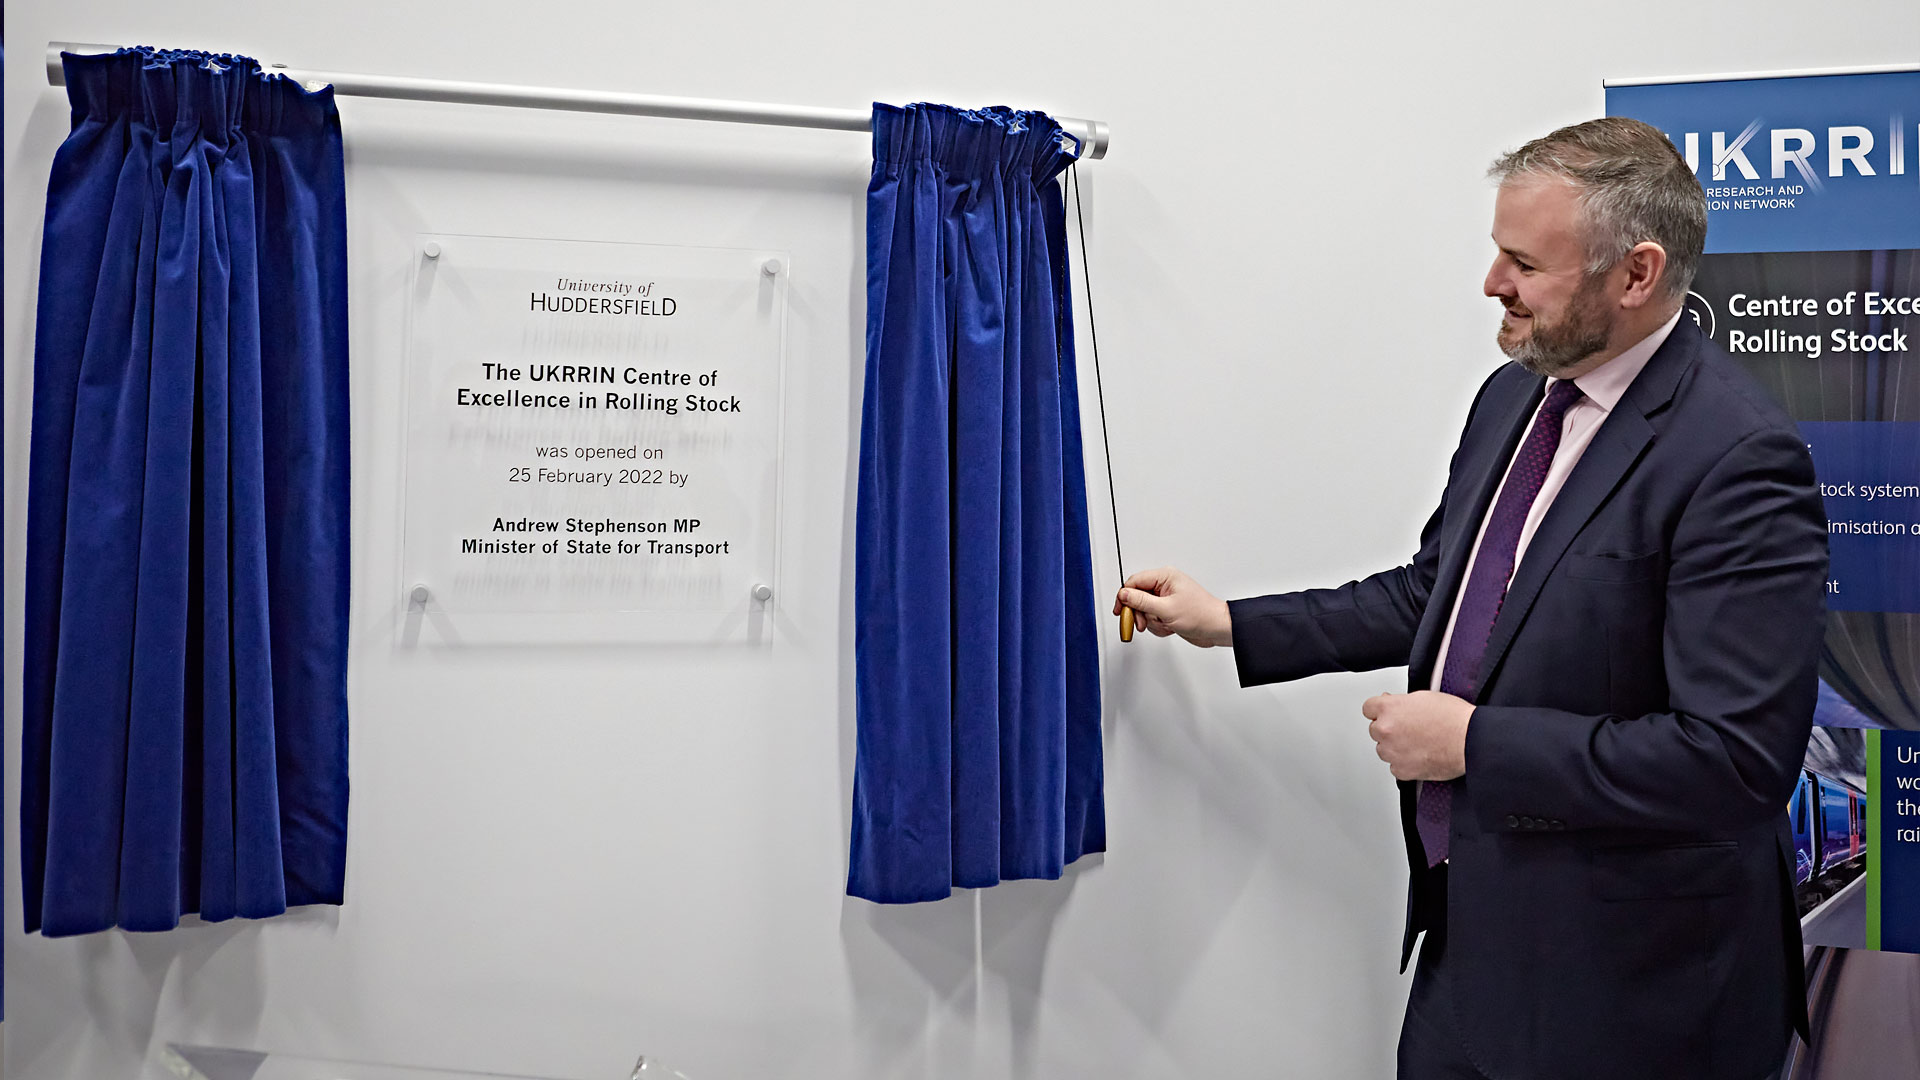 Andrew Stephenson MP officially opens the Centre of Excellence in Rolling Stock at the University of Huddersfield